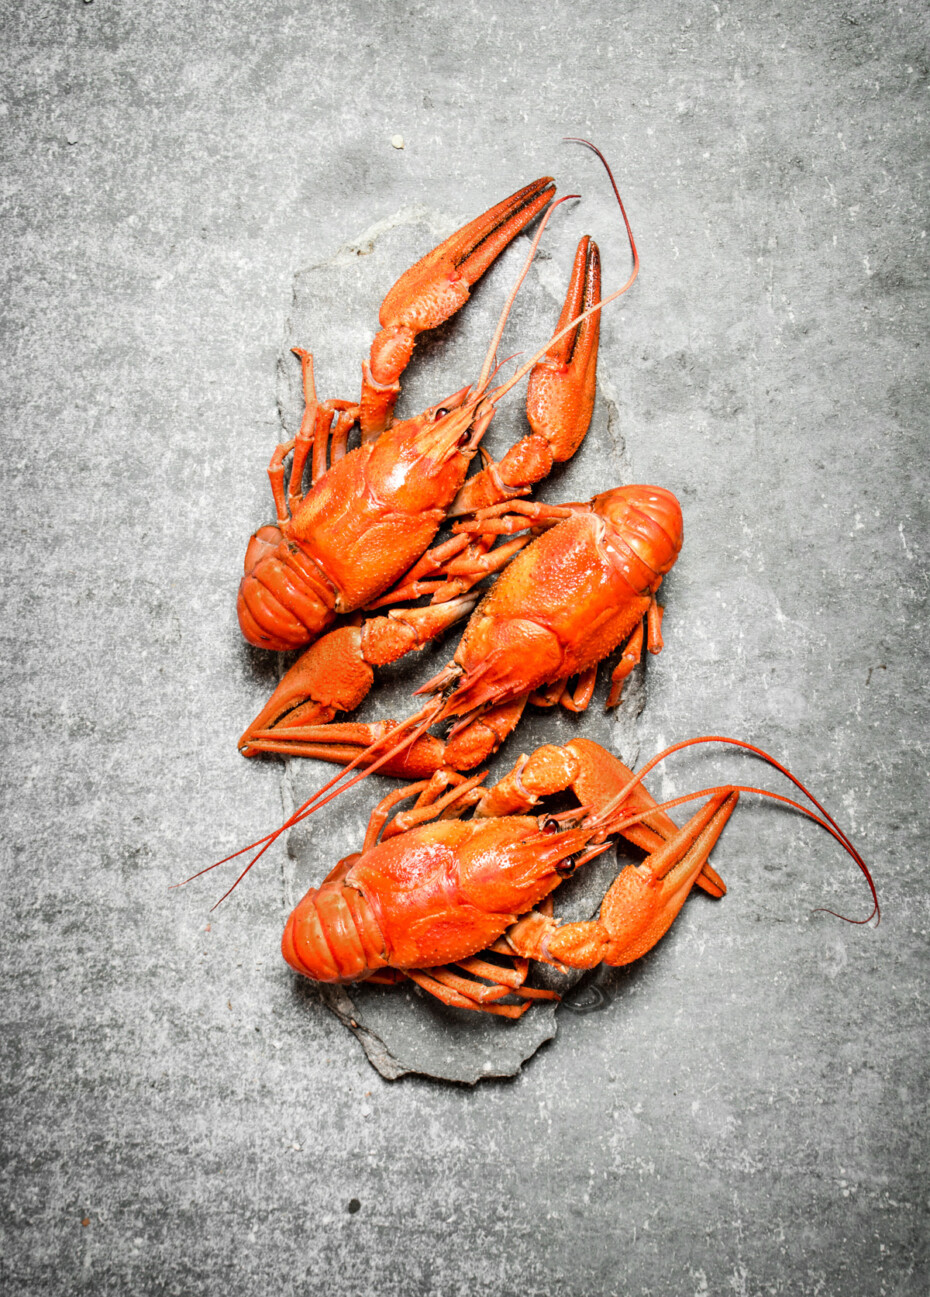 How to Reheat Crawfish Without Making Them Rubbery